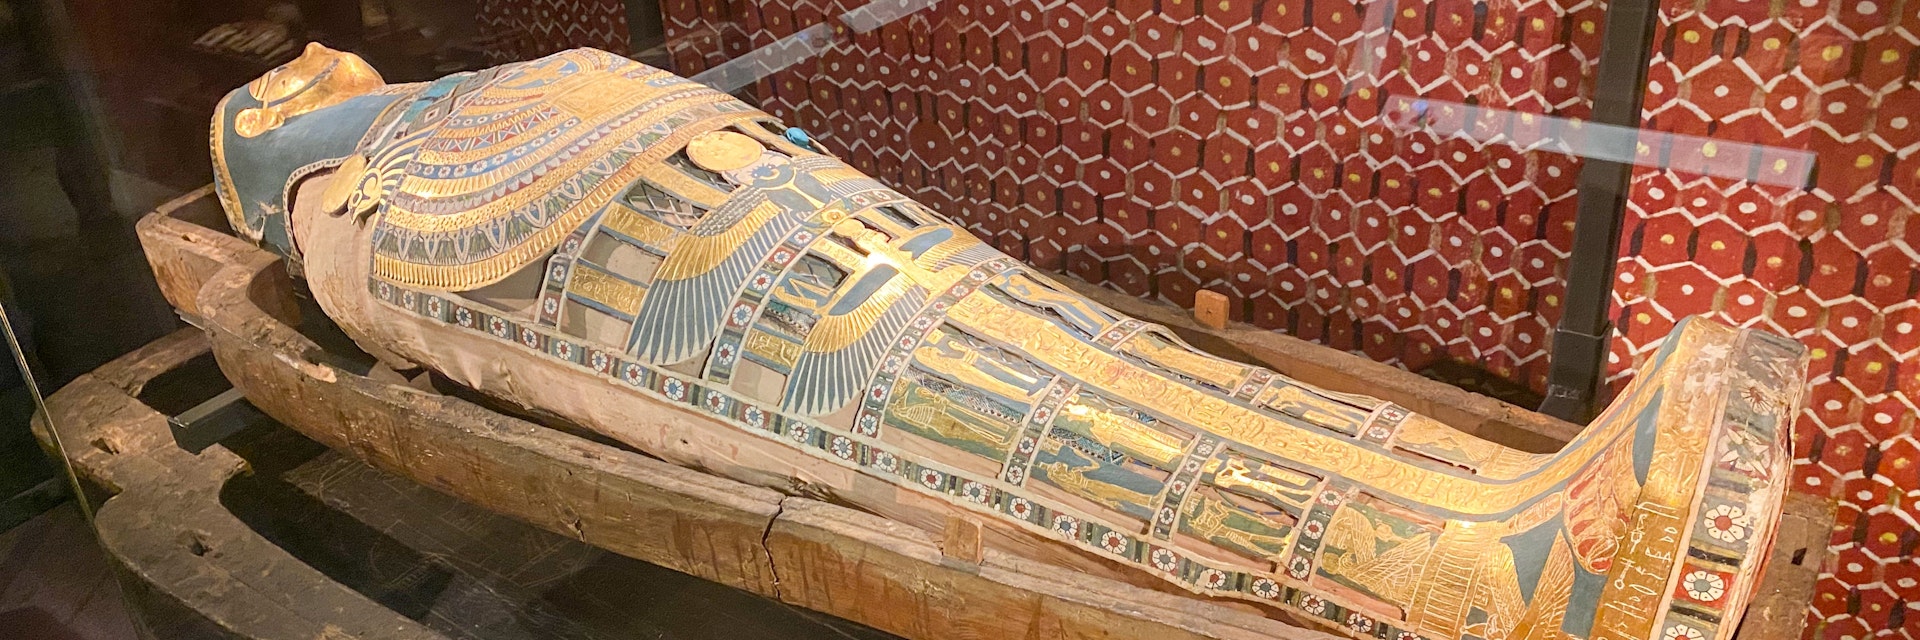 Egyptian Mummies and sarcophagus in Medelhavsmuseet.